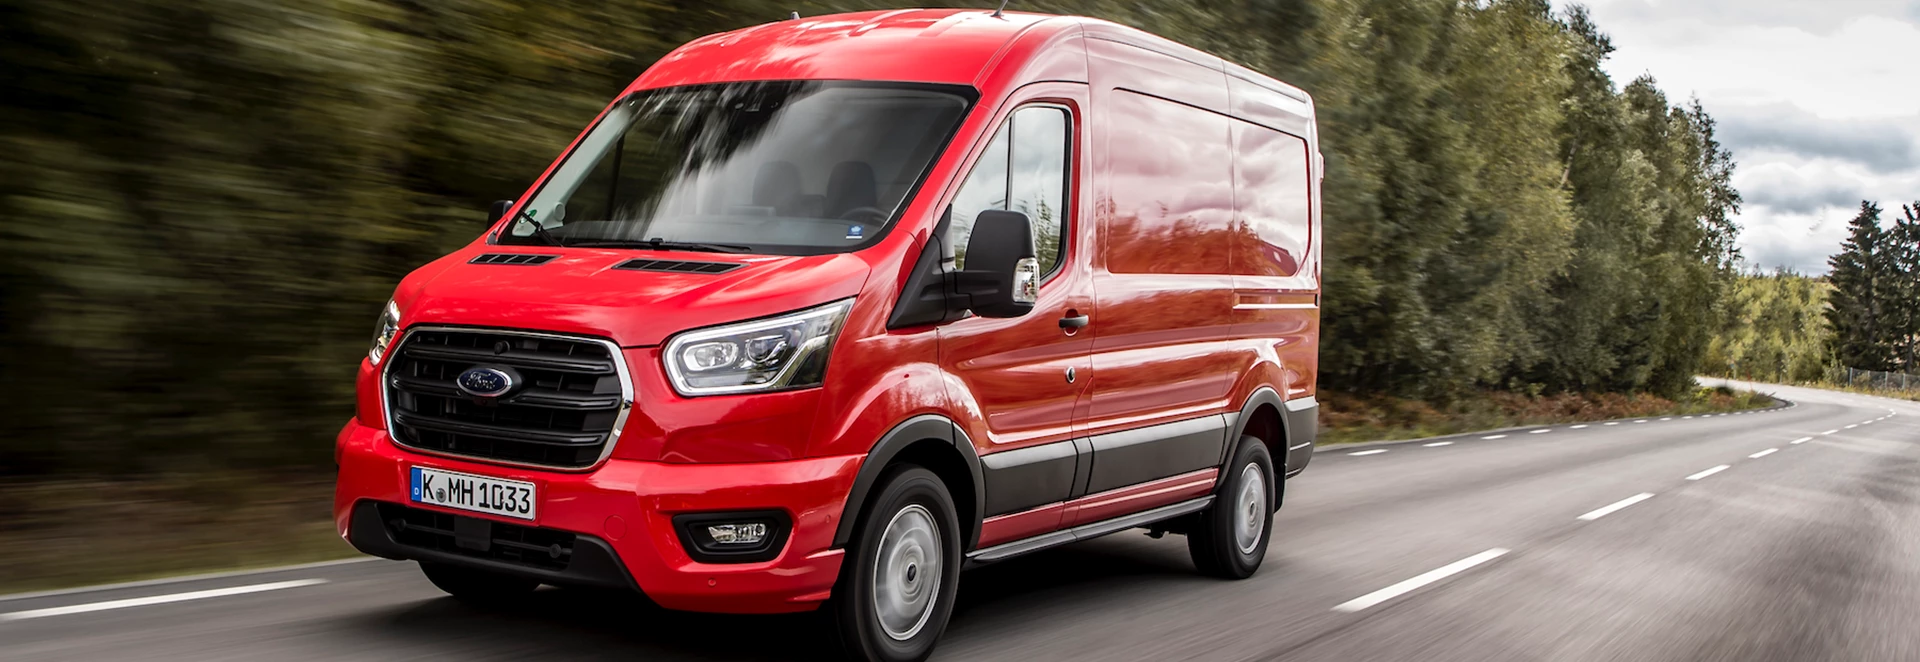 What’s new on the 2020 Ford Transit?